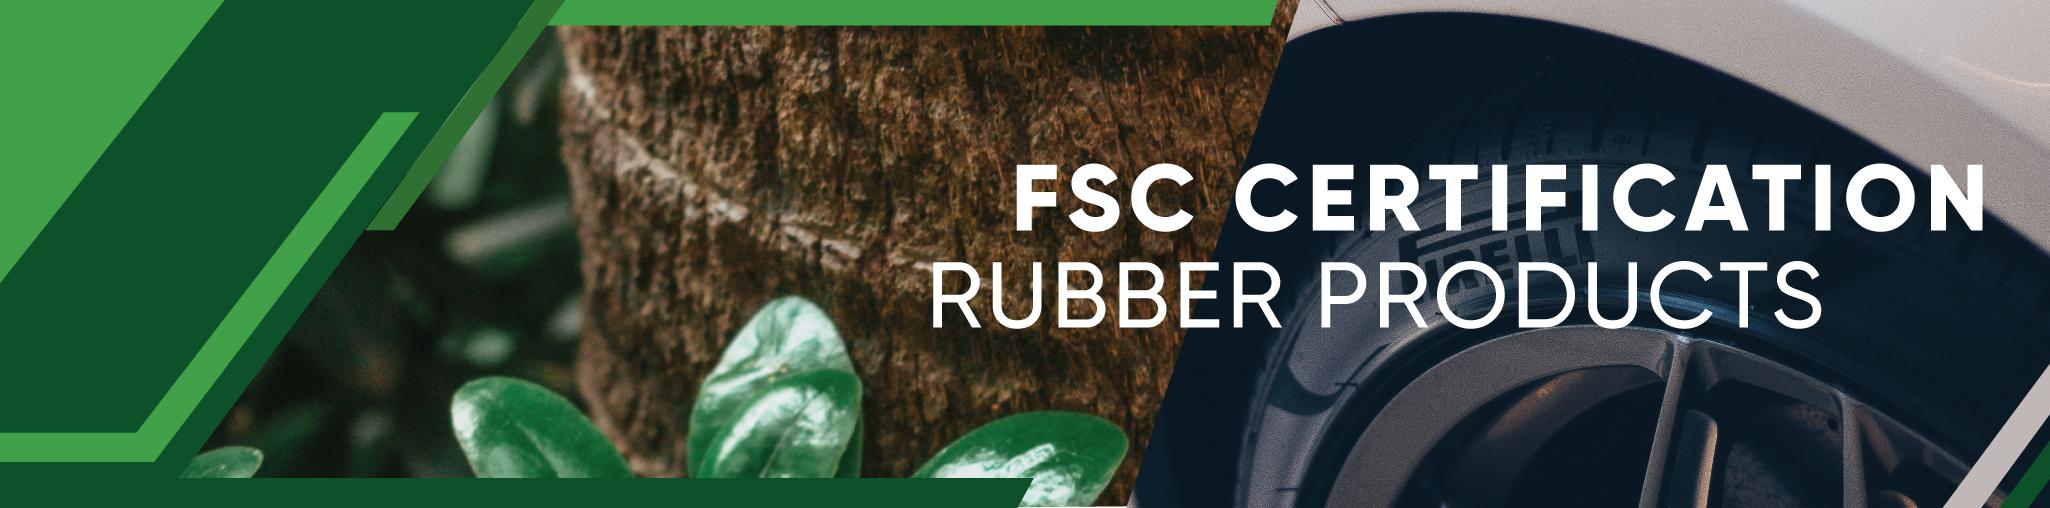 FSC Certification for Rubber Products